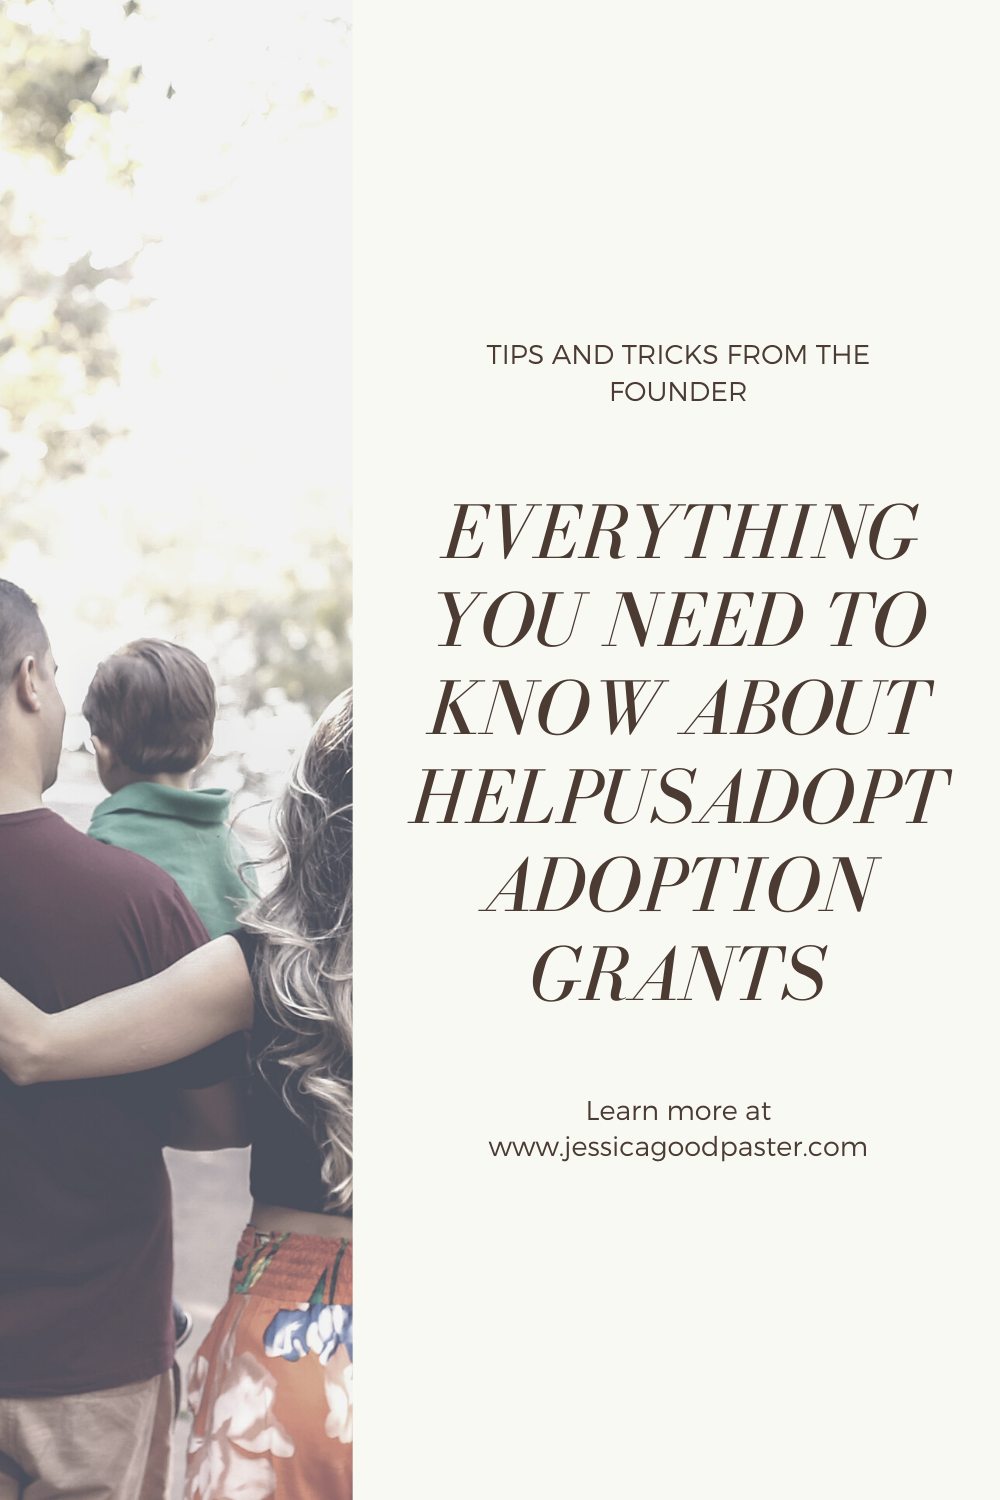 Tips and tricks for completing a successful adoption grant application from HelpUsAdopt.org. You can afford adoption with the help of grants, fundraisers, and saving. Learn how here. #adoption #adoptiongrant #adopt #helpusadopt